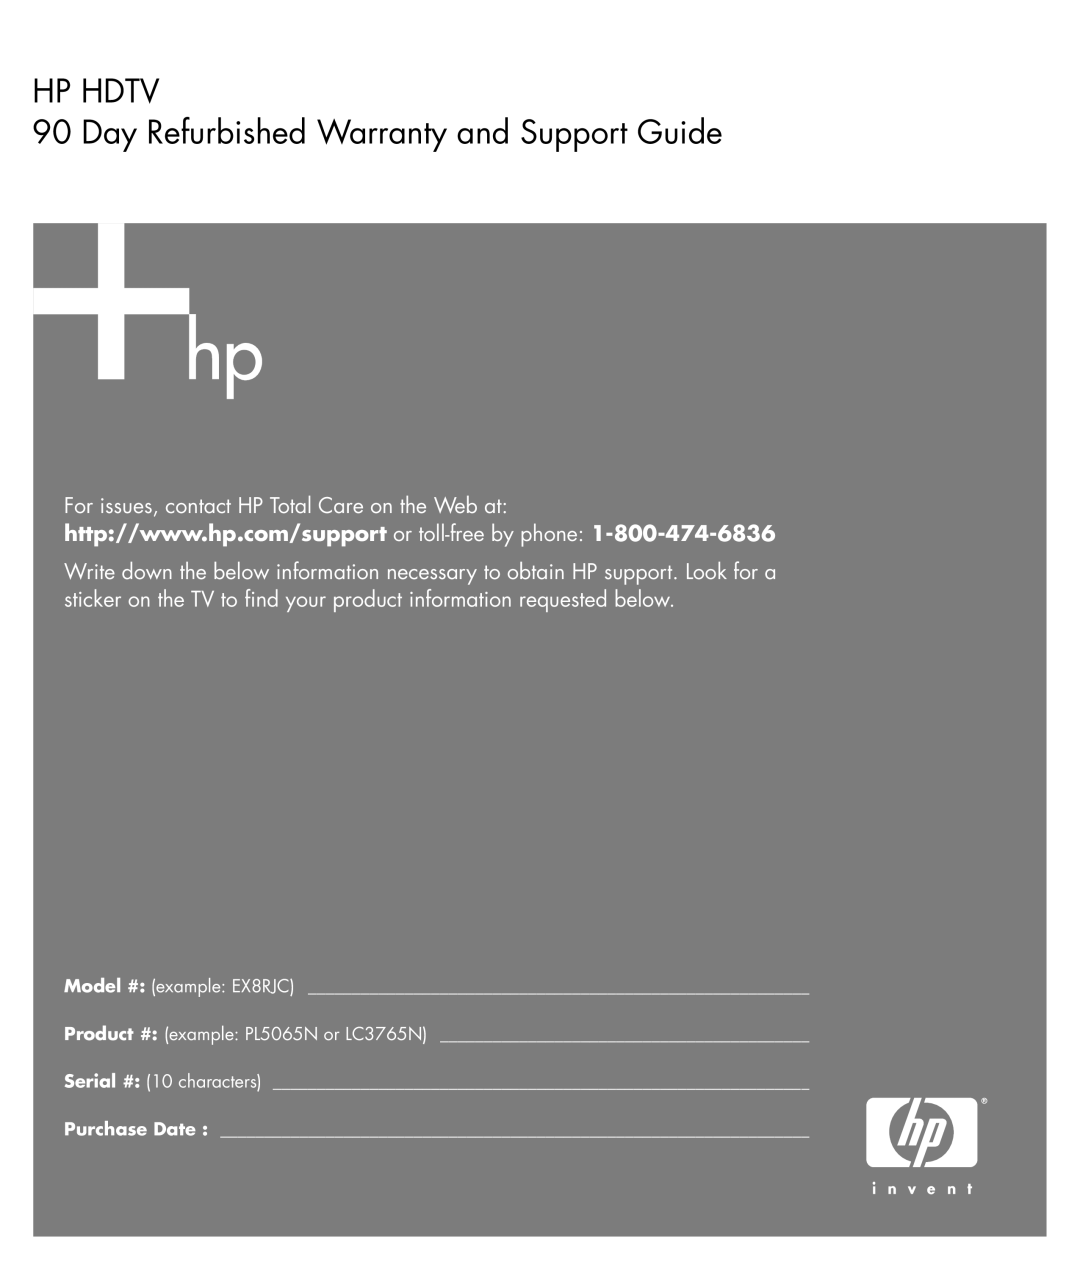 HP LC3260N 32 inch manual HP HDTV 90 Day Refurbished Warranty and Support Guide, Serial # 10 characters Purchase Date 